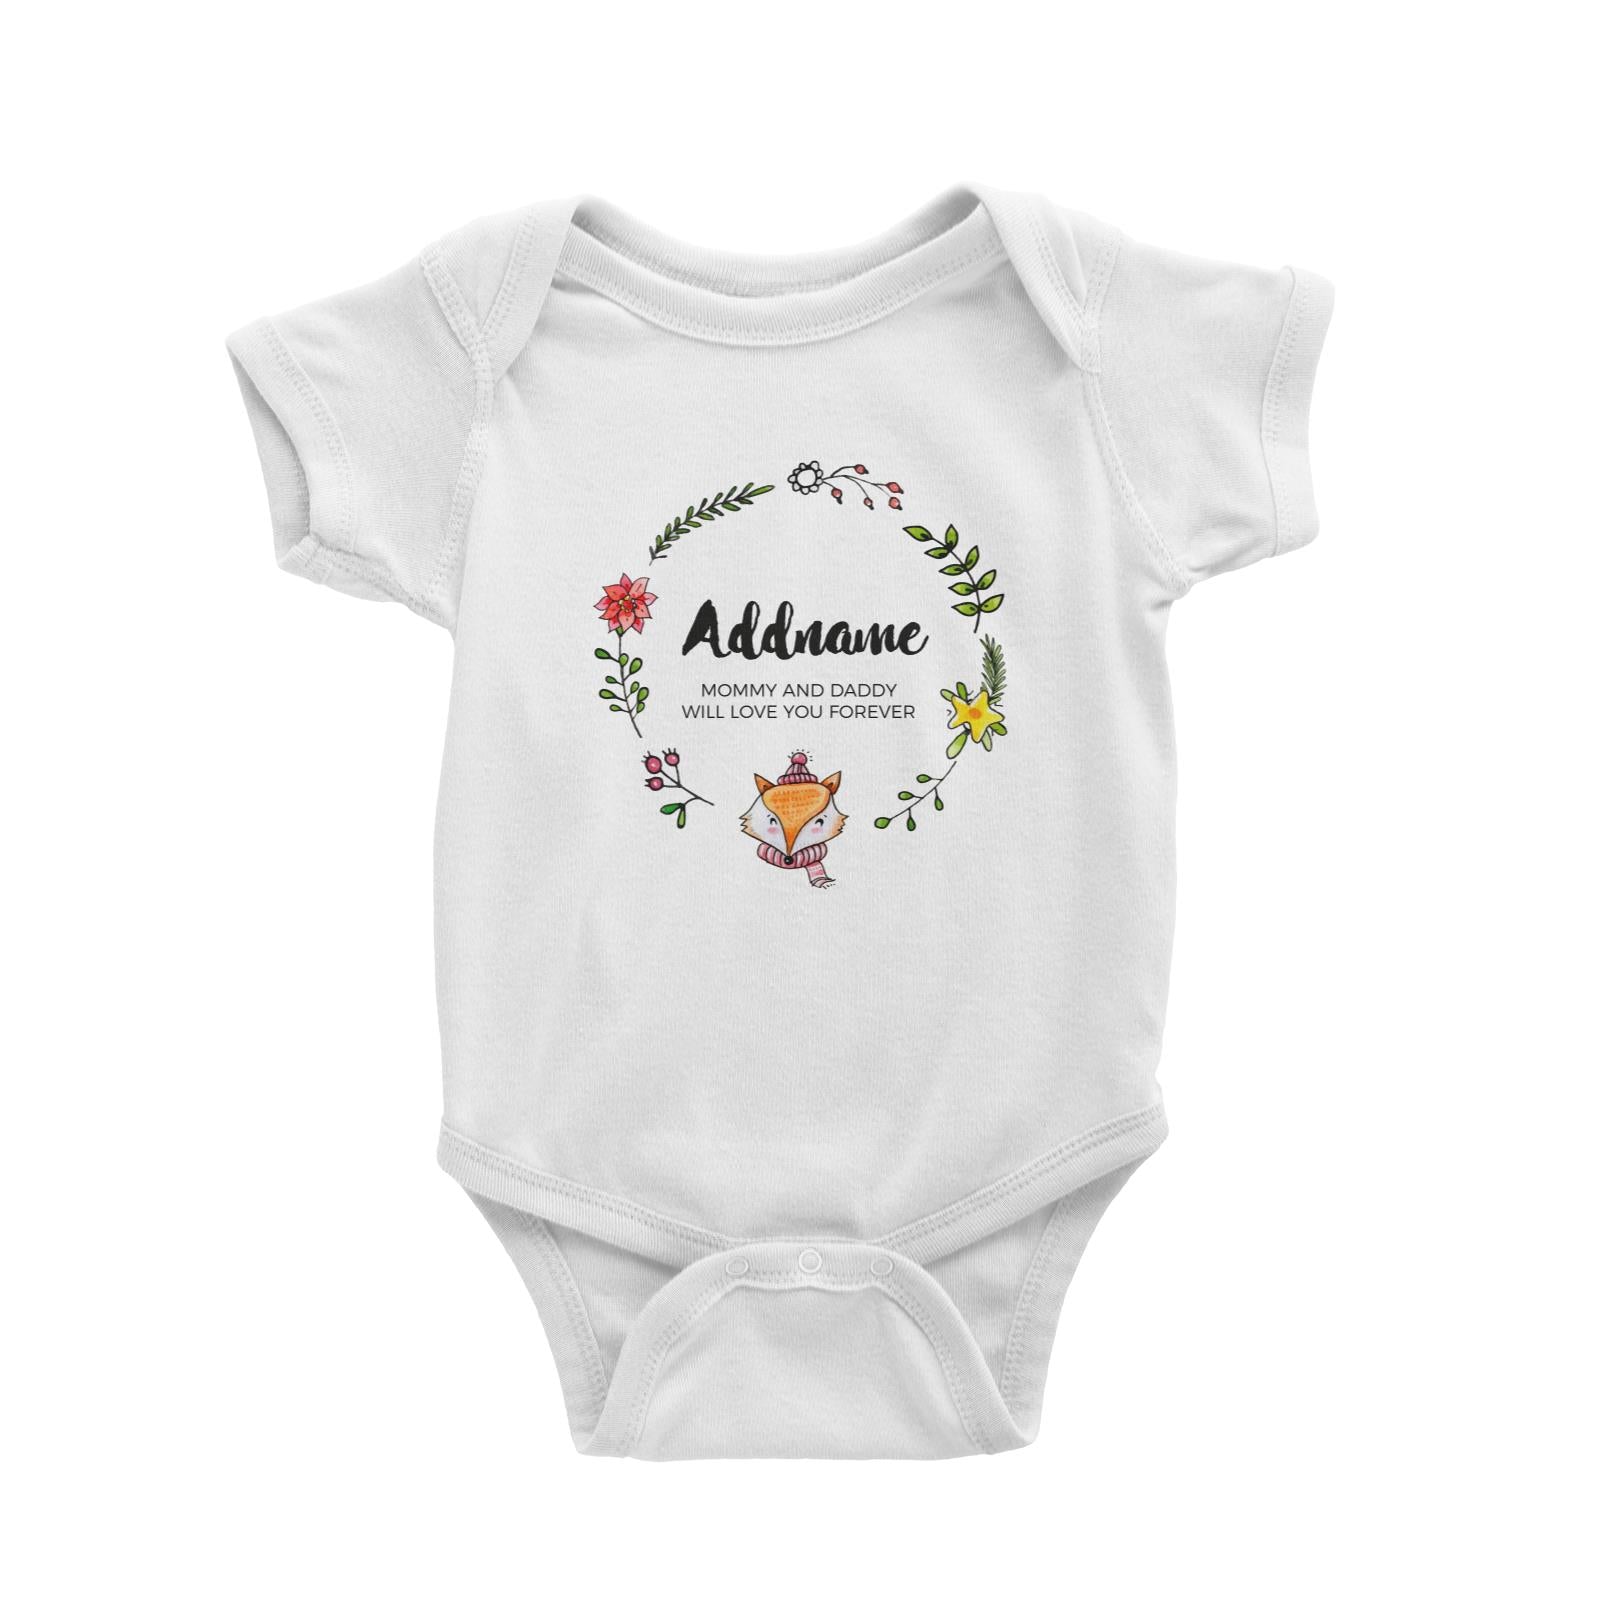 Doodle Green Wreath with Cute Fox Personalizable with Name and Text Baby Romper